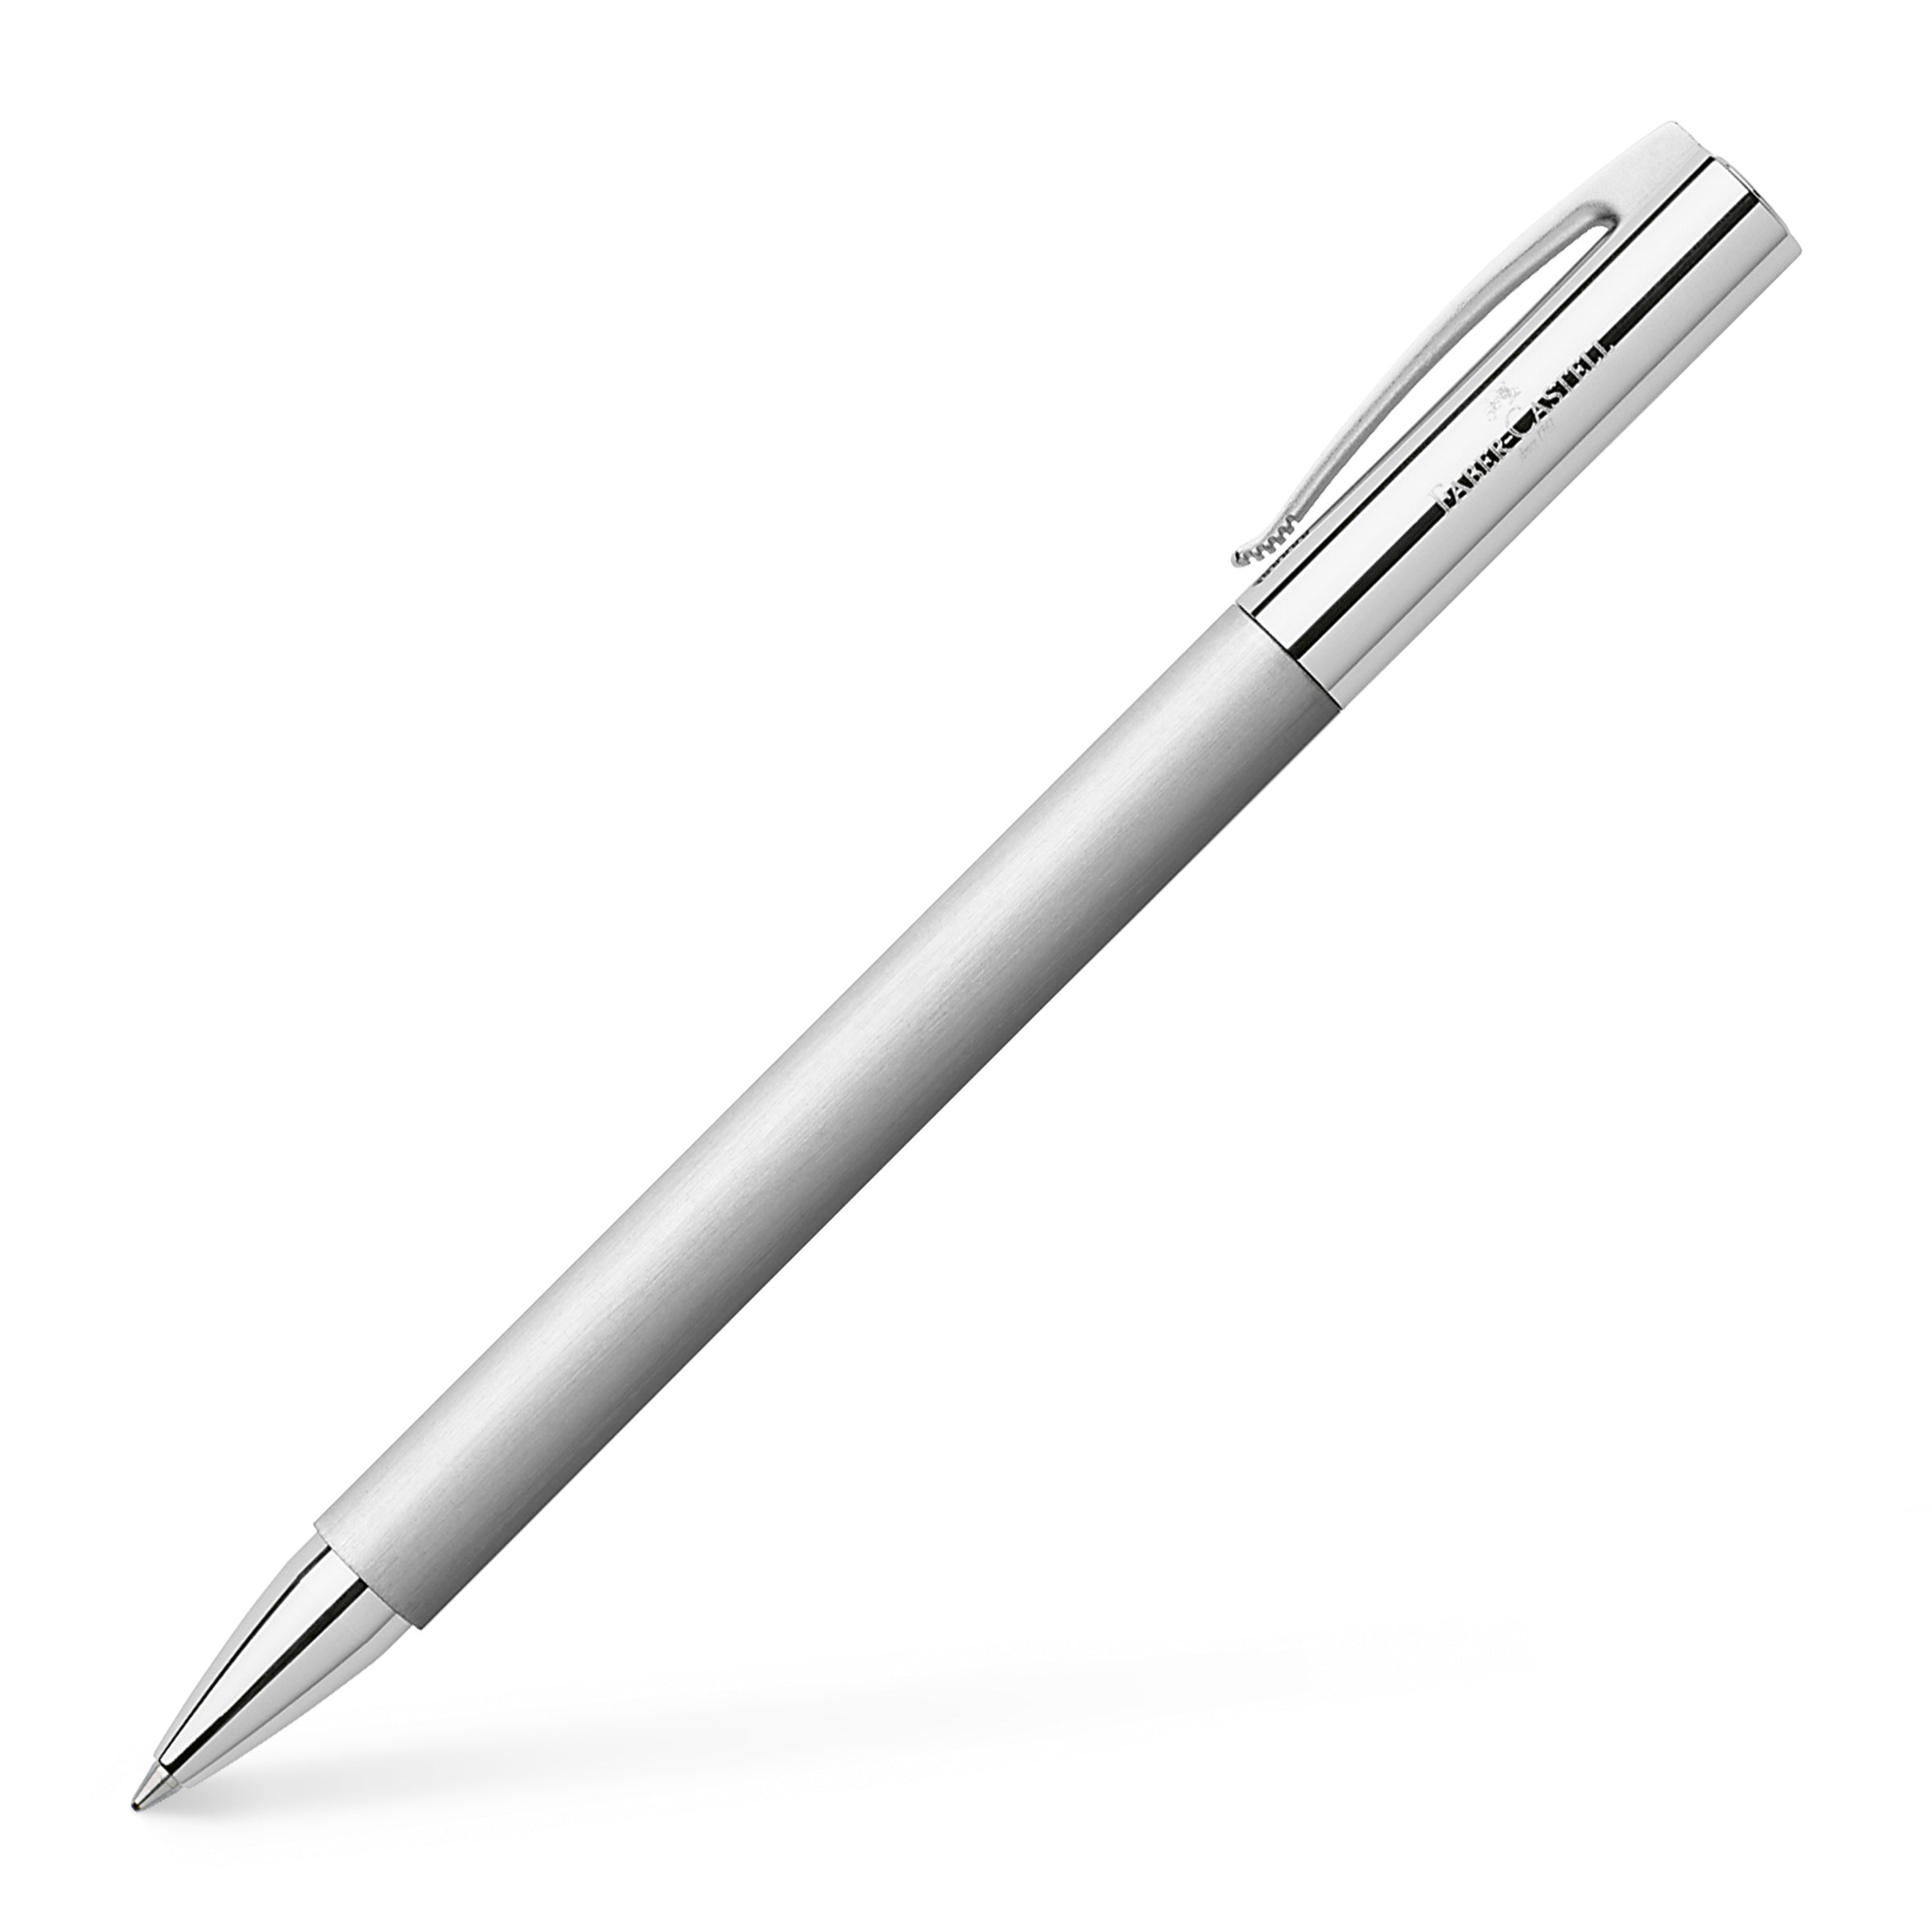 Fabster-call Ambition Ballpoint Pen Brushed Steel